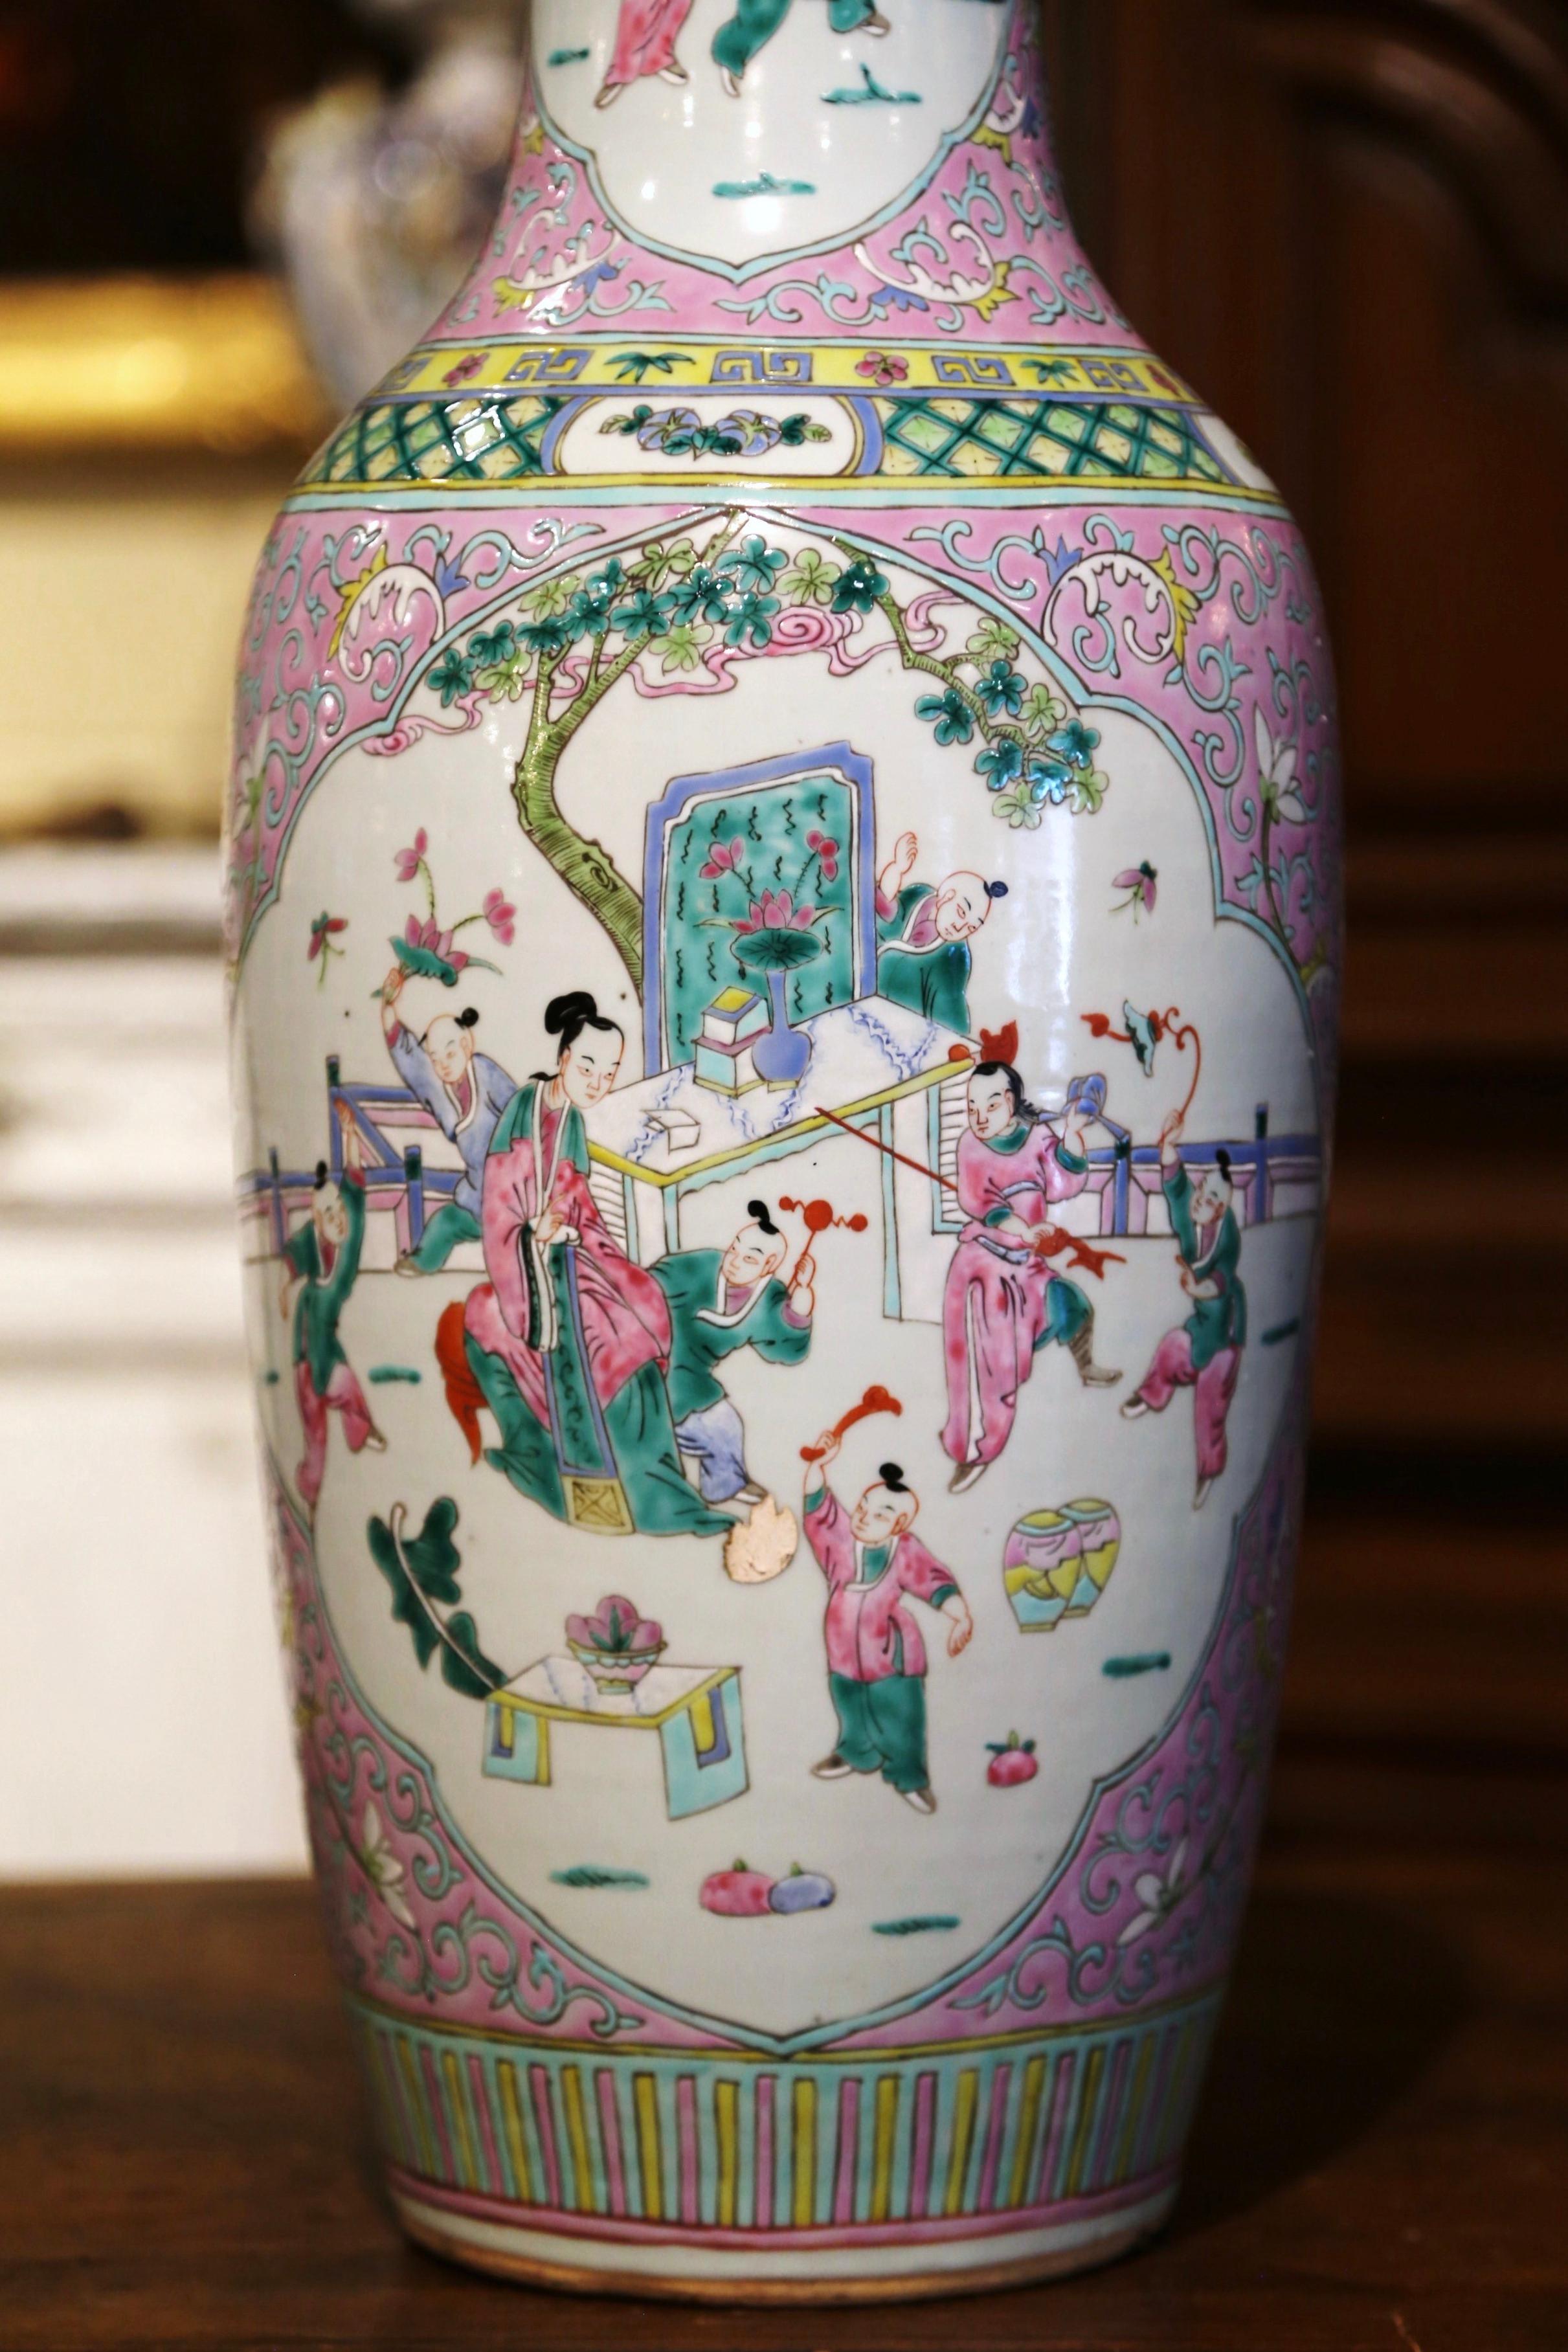 Crafted in China circa 1920, the tall vase is round in shaped with an elegant long neck. The colorful antique urn is decorated with hand painted figural motifs including a mother playing with children. The large Famille Rose vessel is in excellent